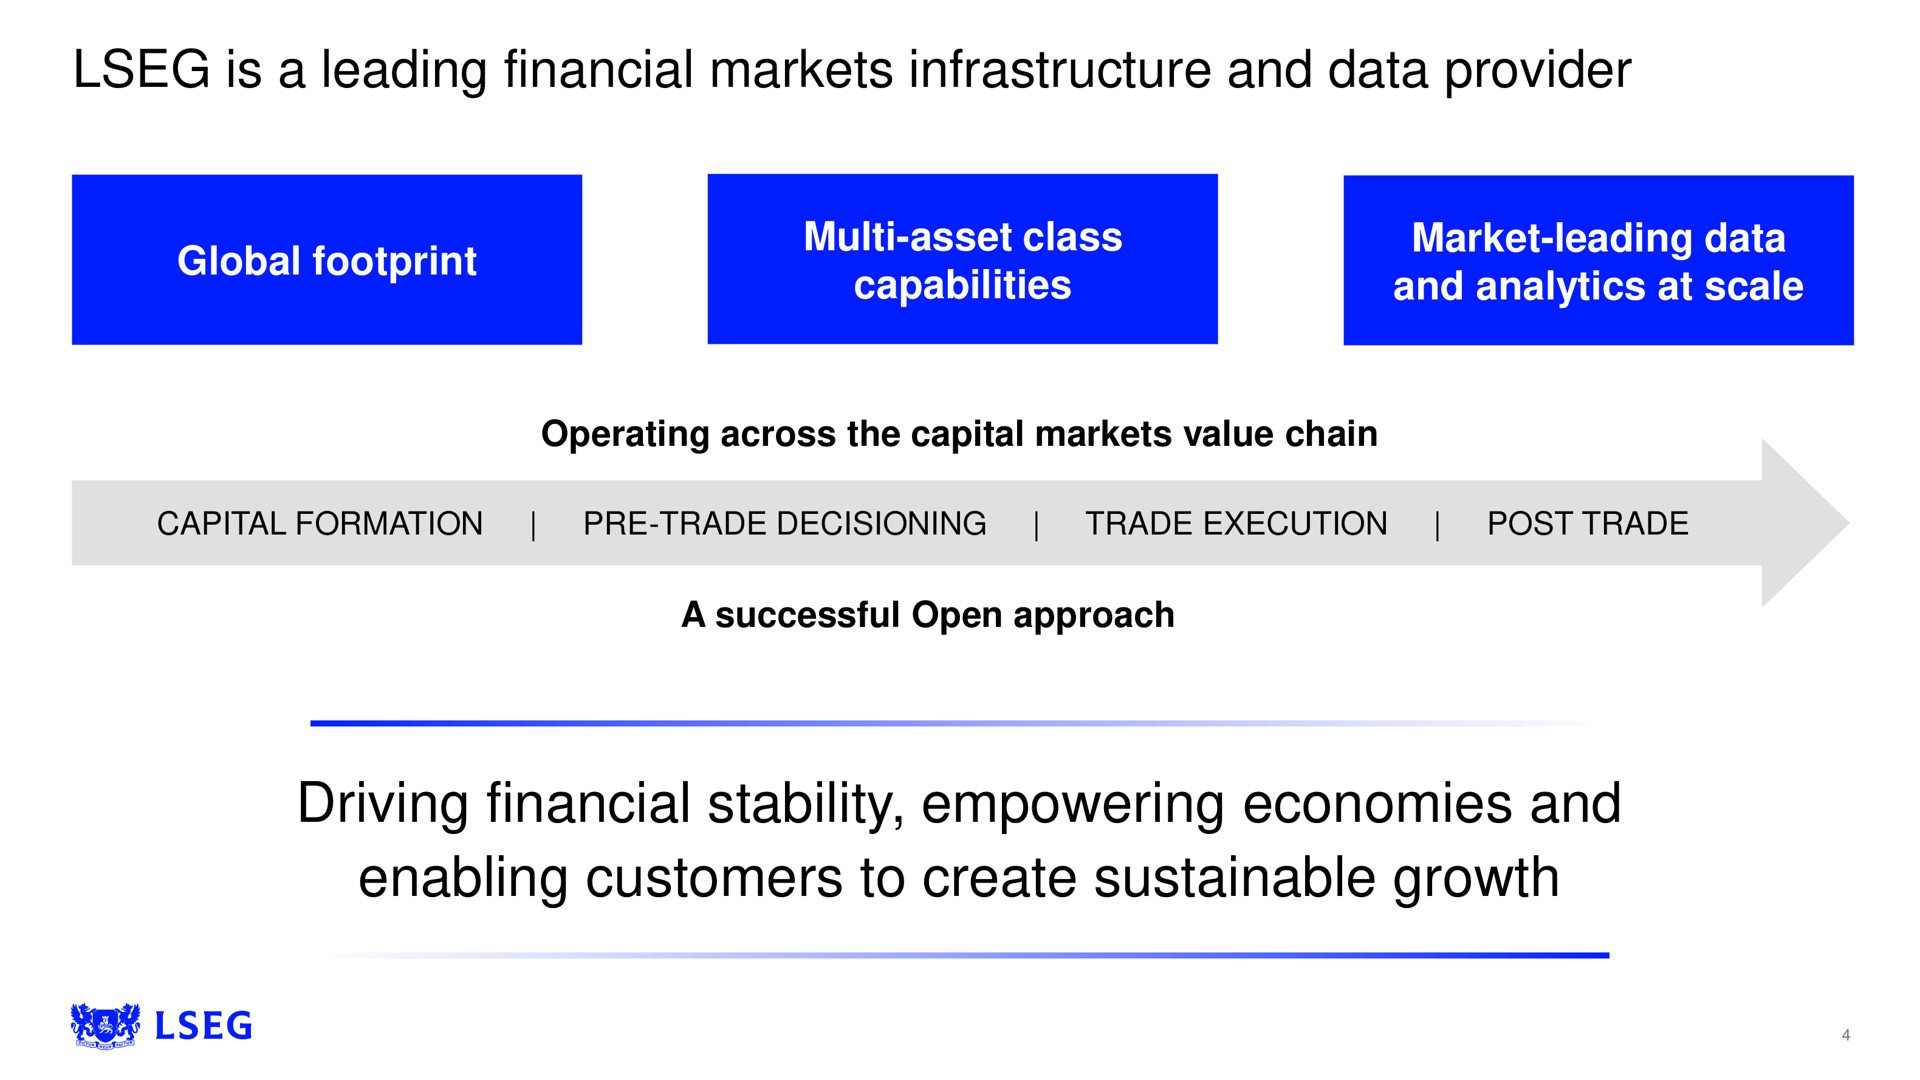 is a leading financial markets infrastructure and data provider driving financial stability empowering economies and enabling customers to create sustainable growth global footprint capabilities analytics at scale | LSE